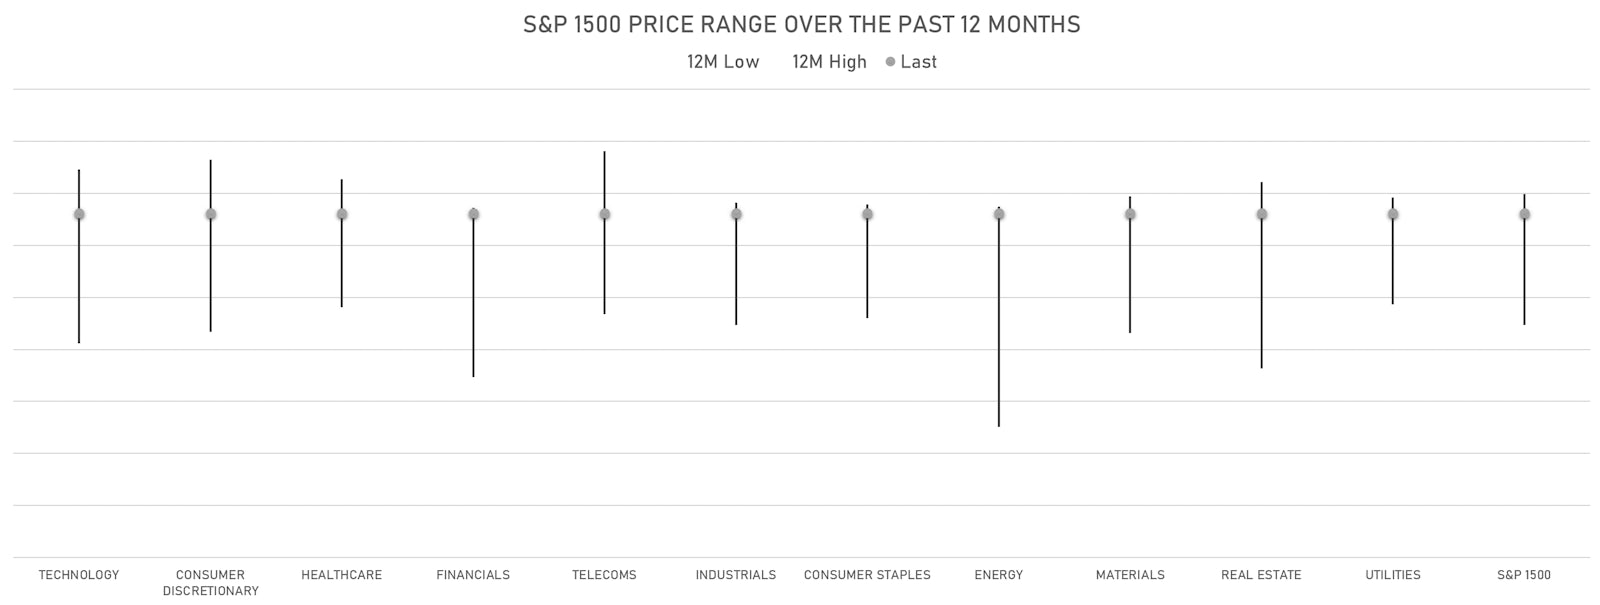 Range Of Prices For S&P 1500 Sectors Over The Past Year | Sources: ϕpost, Refinitiv data